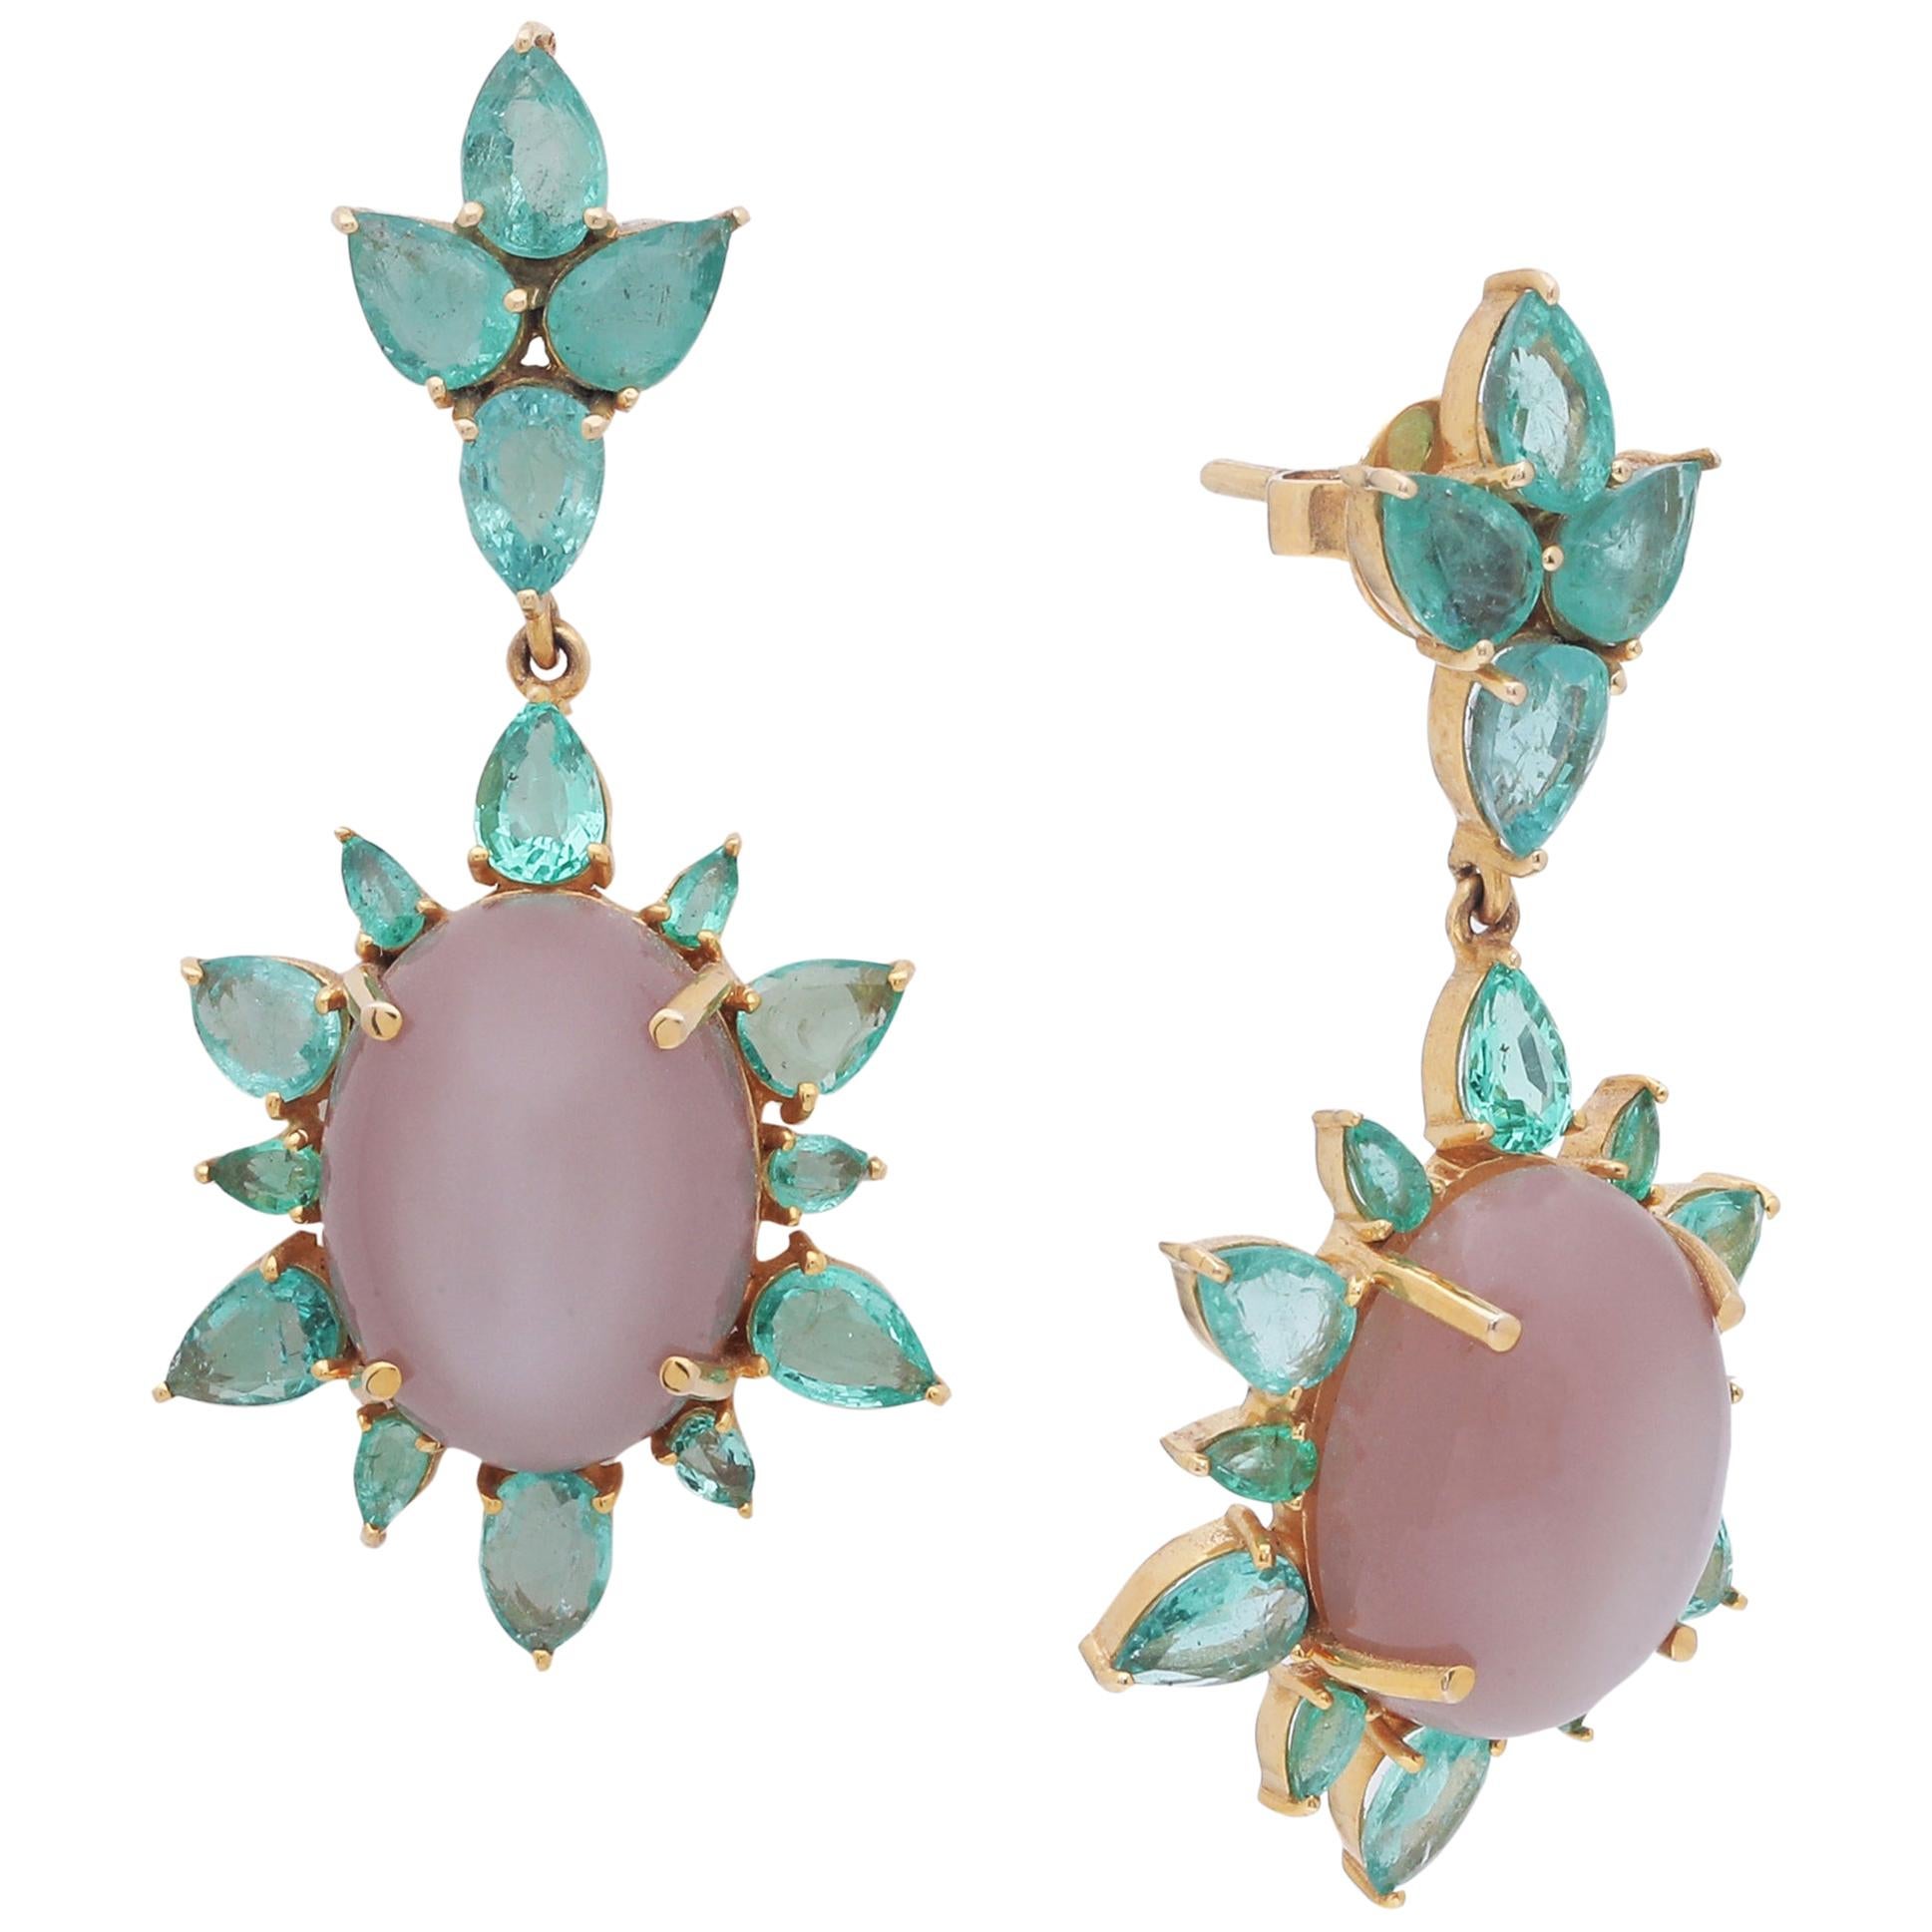 Emerald Pear Shape and Moonstone Cabochon Earring Handcrafted in 18 Karat Gold